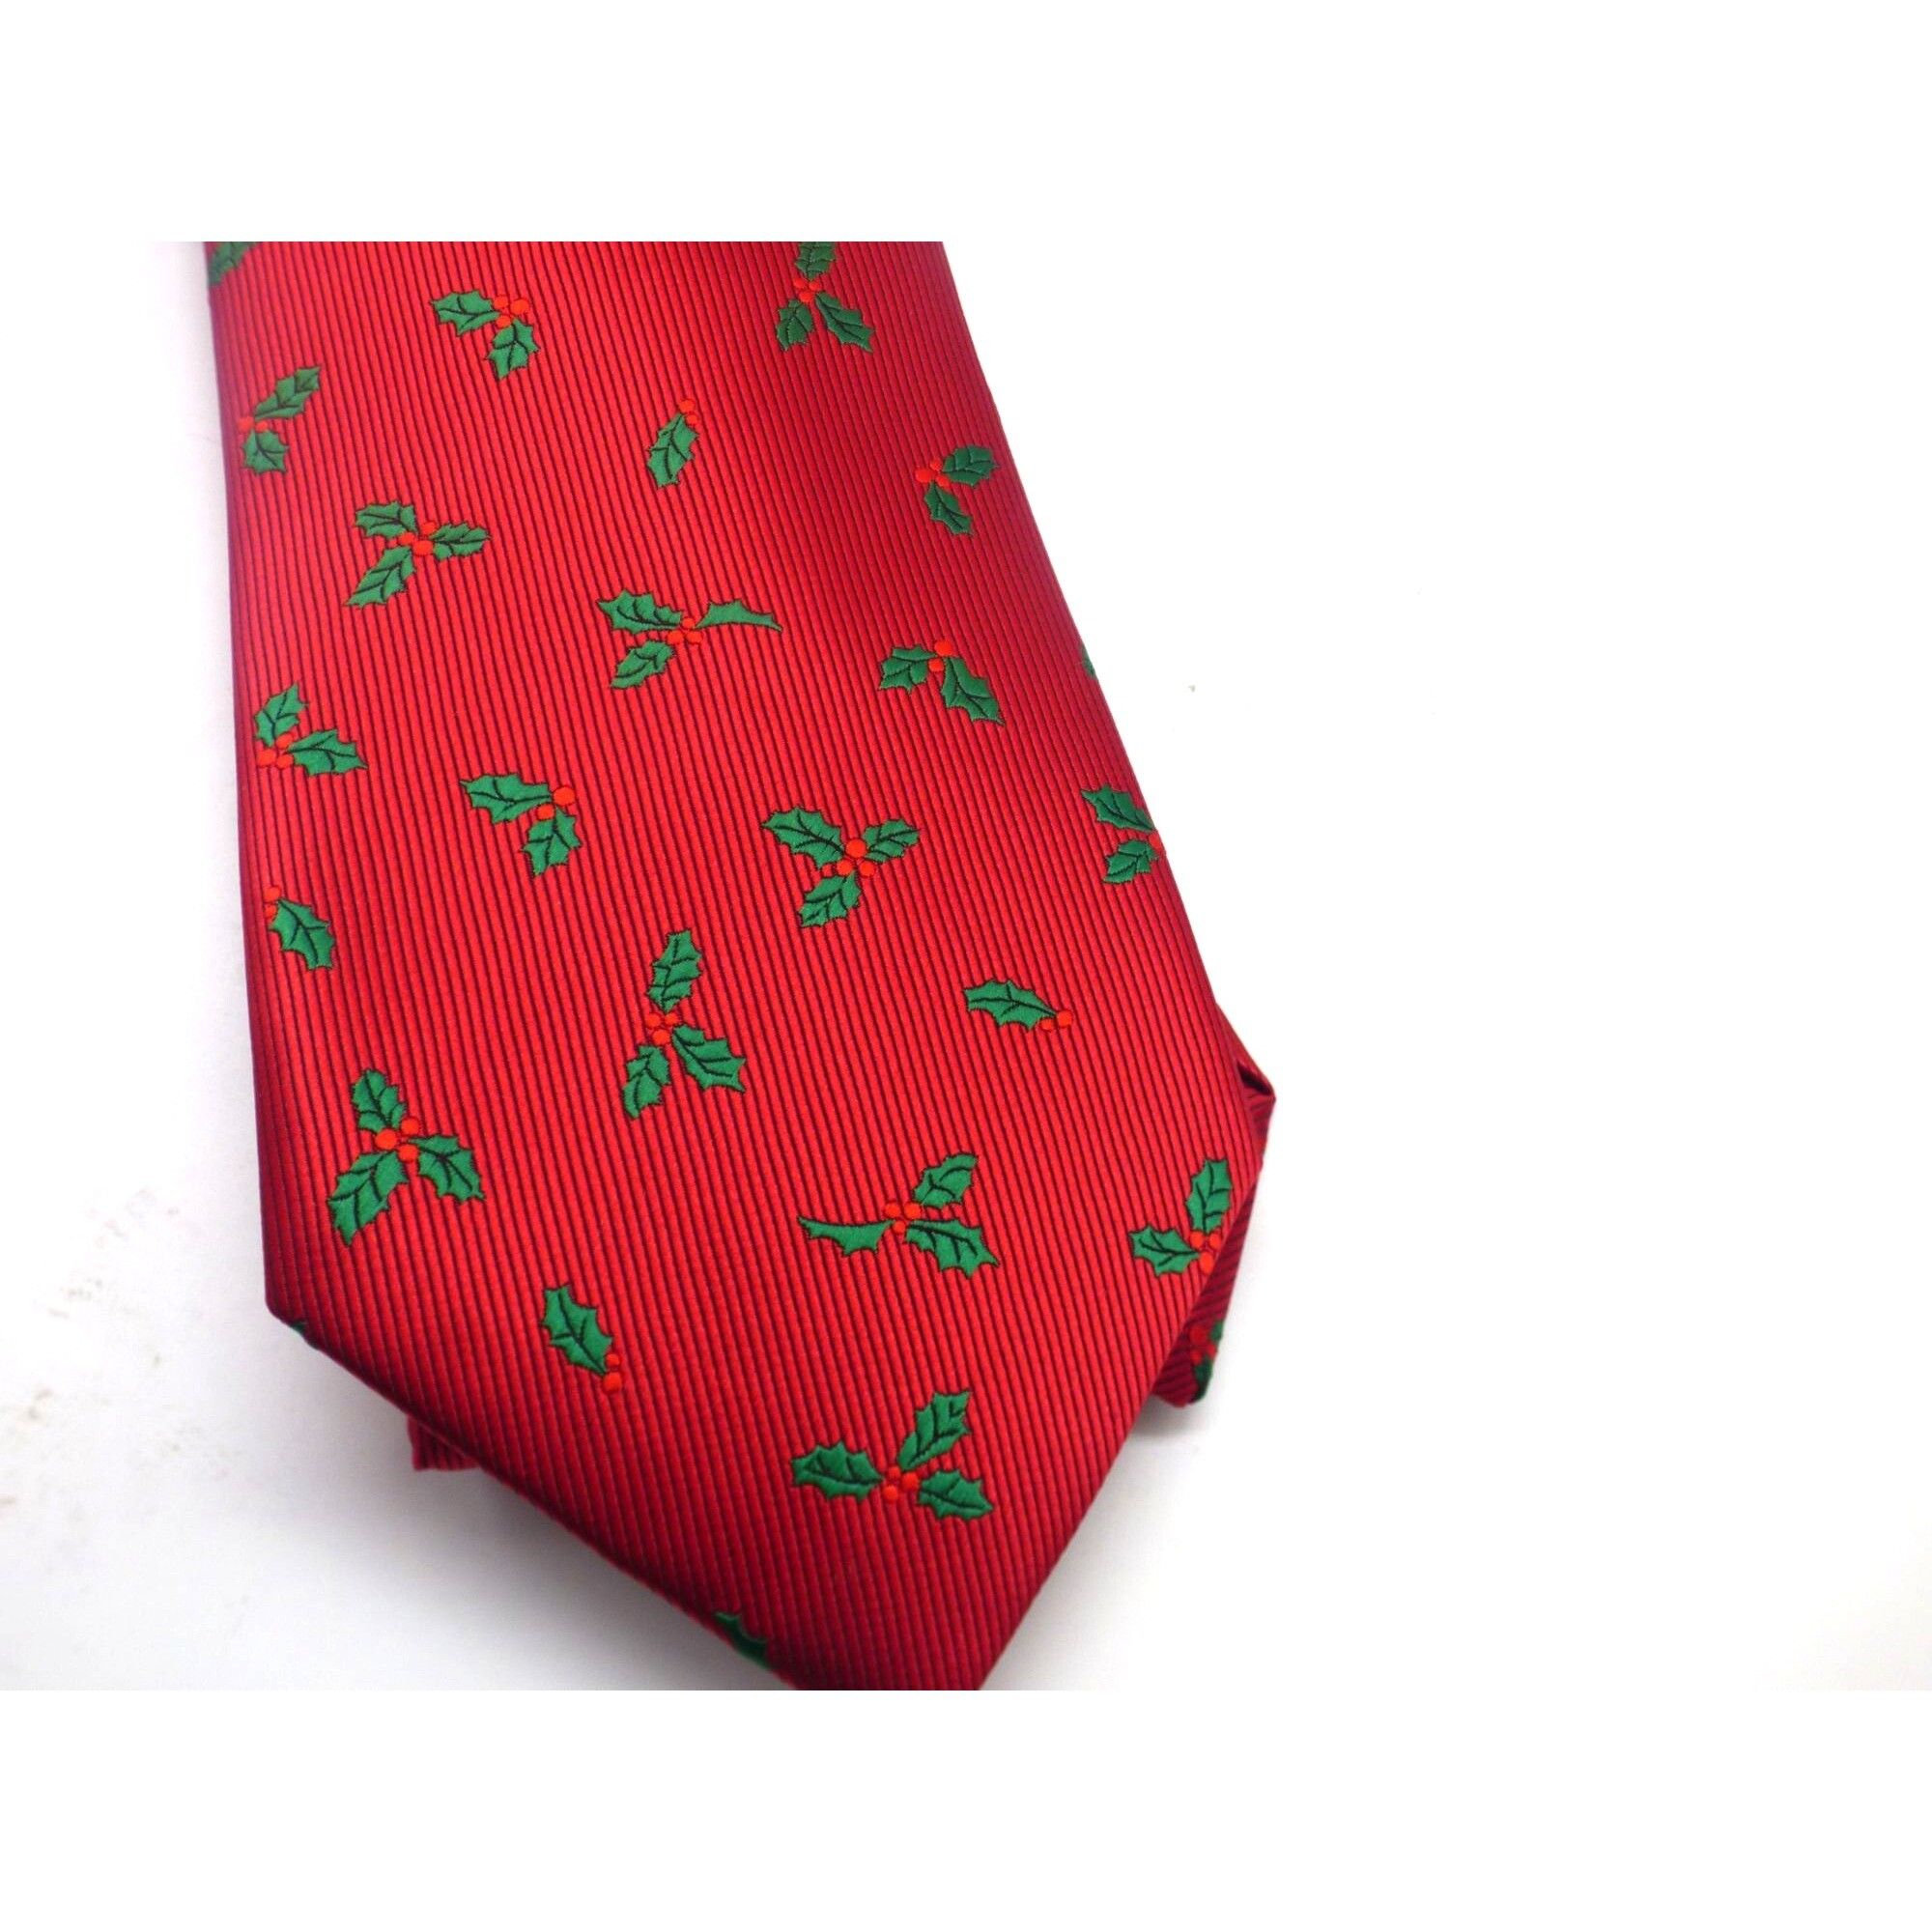 John Ashford JOHN ASHFORD Woven Holly Men's Holiday Tie, Red Size ONE SIZE - 1 Preview